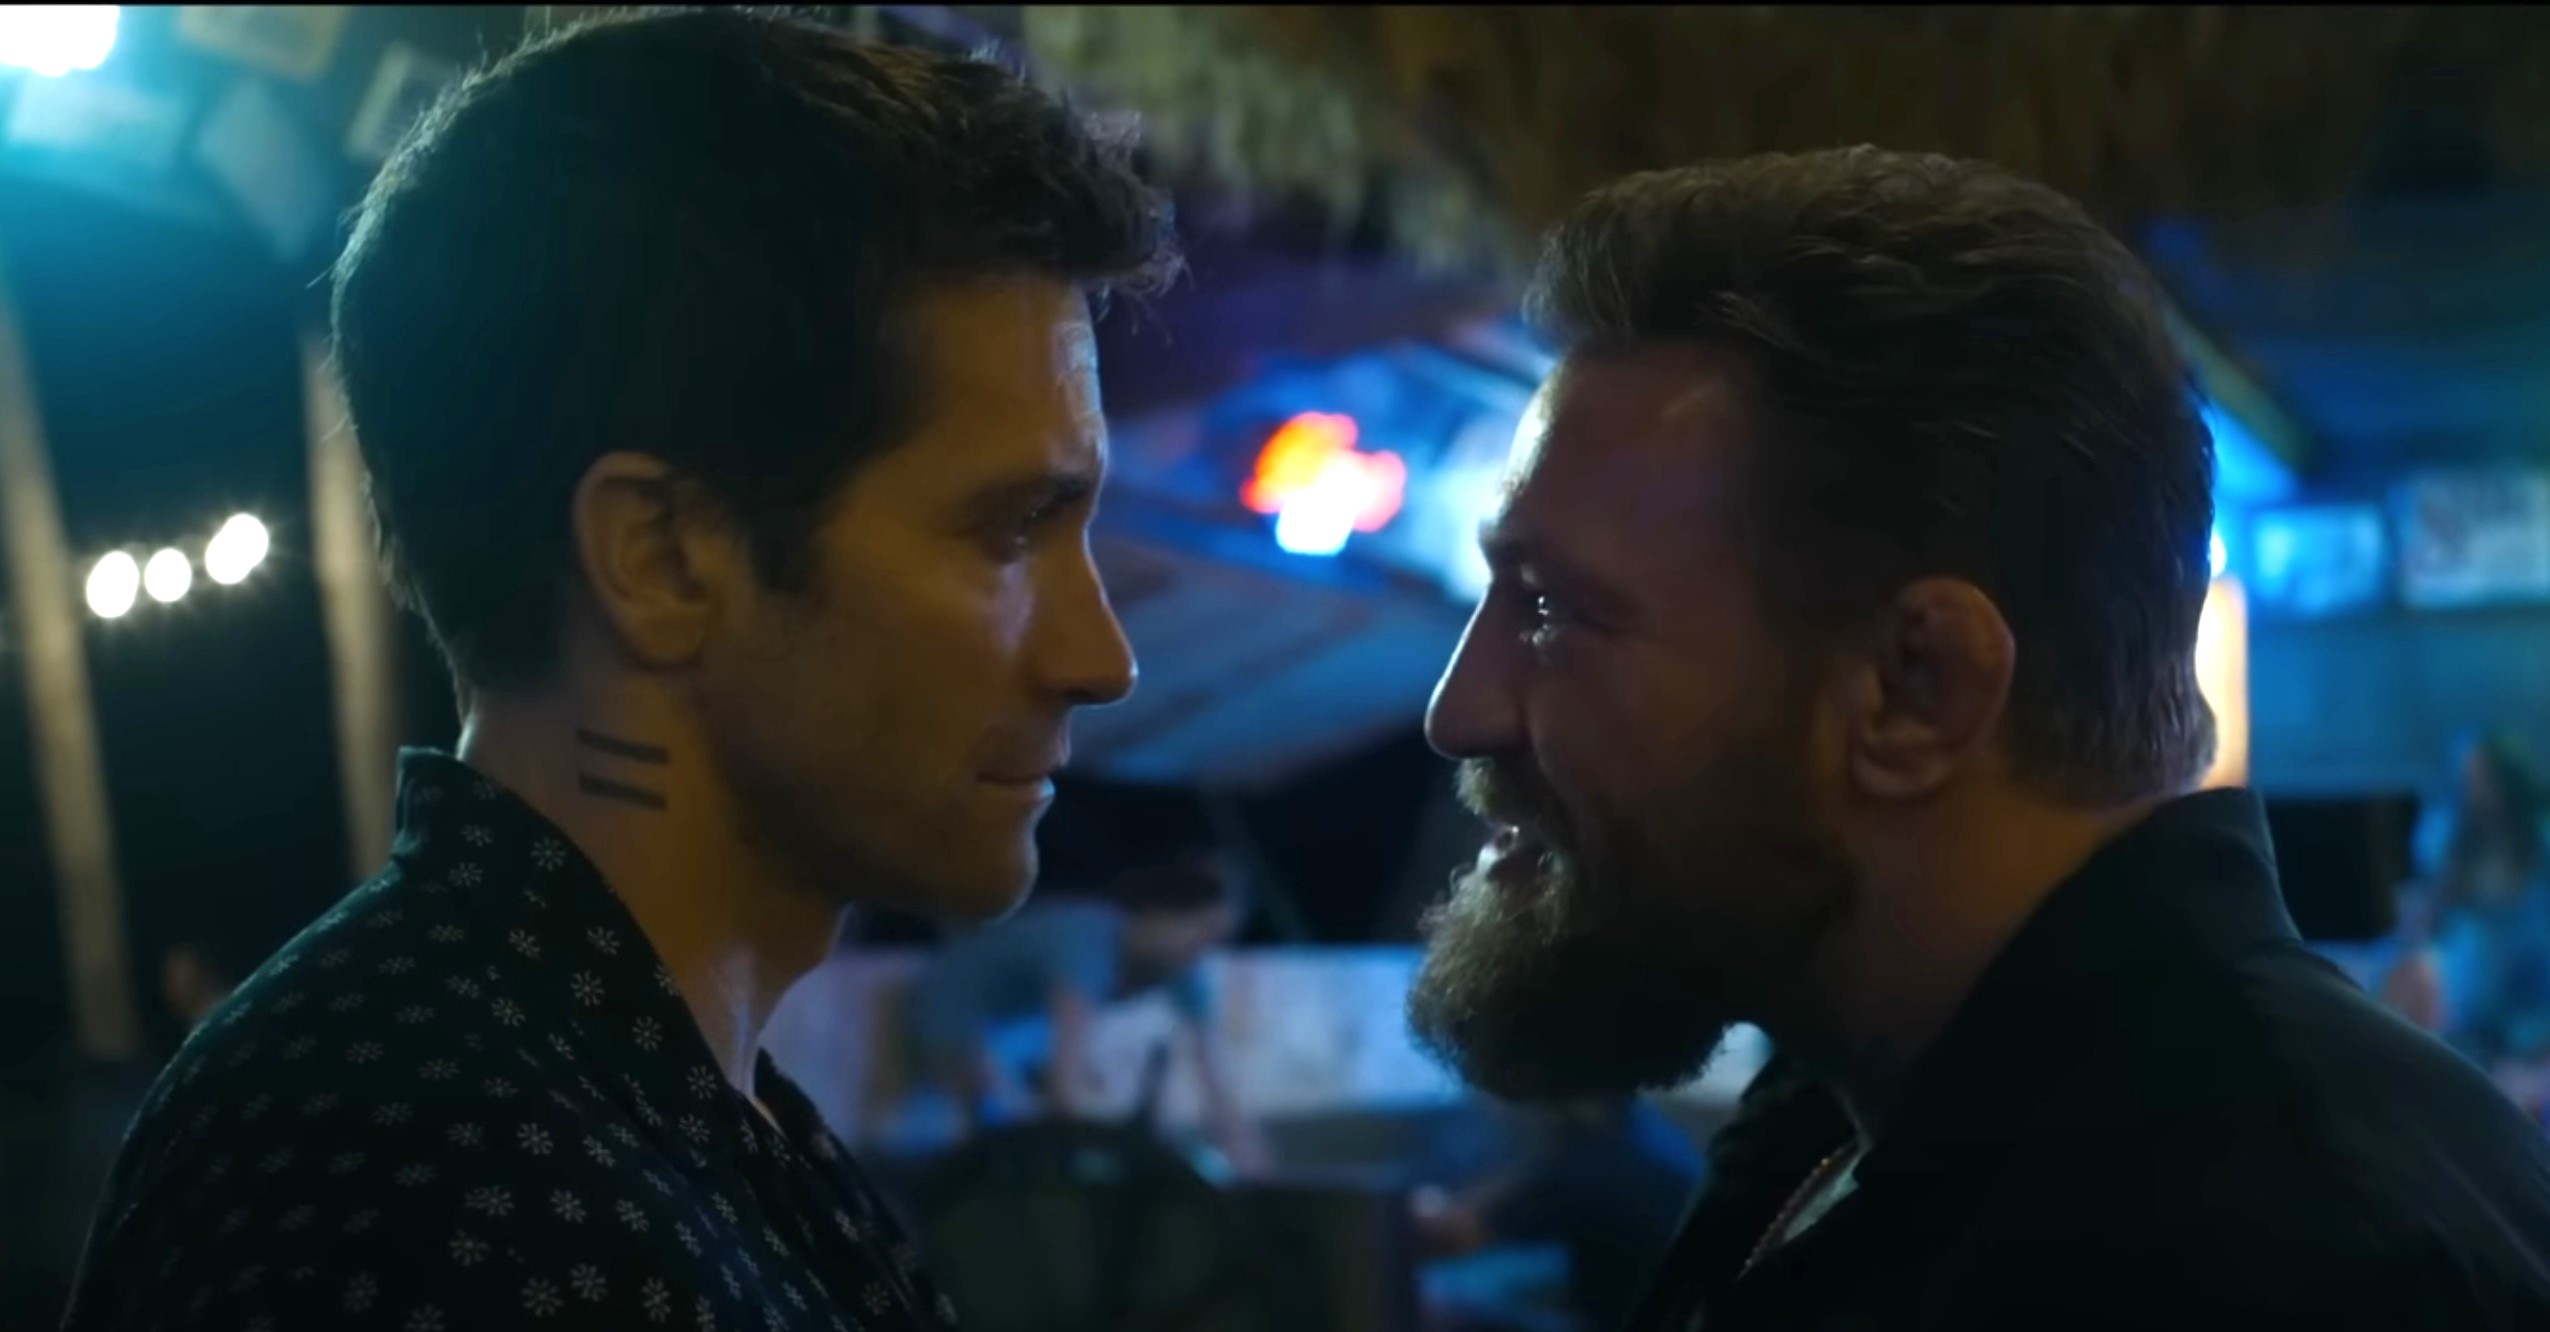 'Road House' Trailer: Jake Gyllenhaal and Conor McGregor Face Off In Amazon Remake